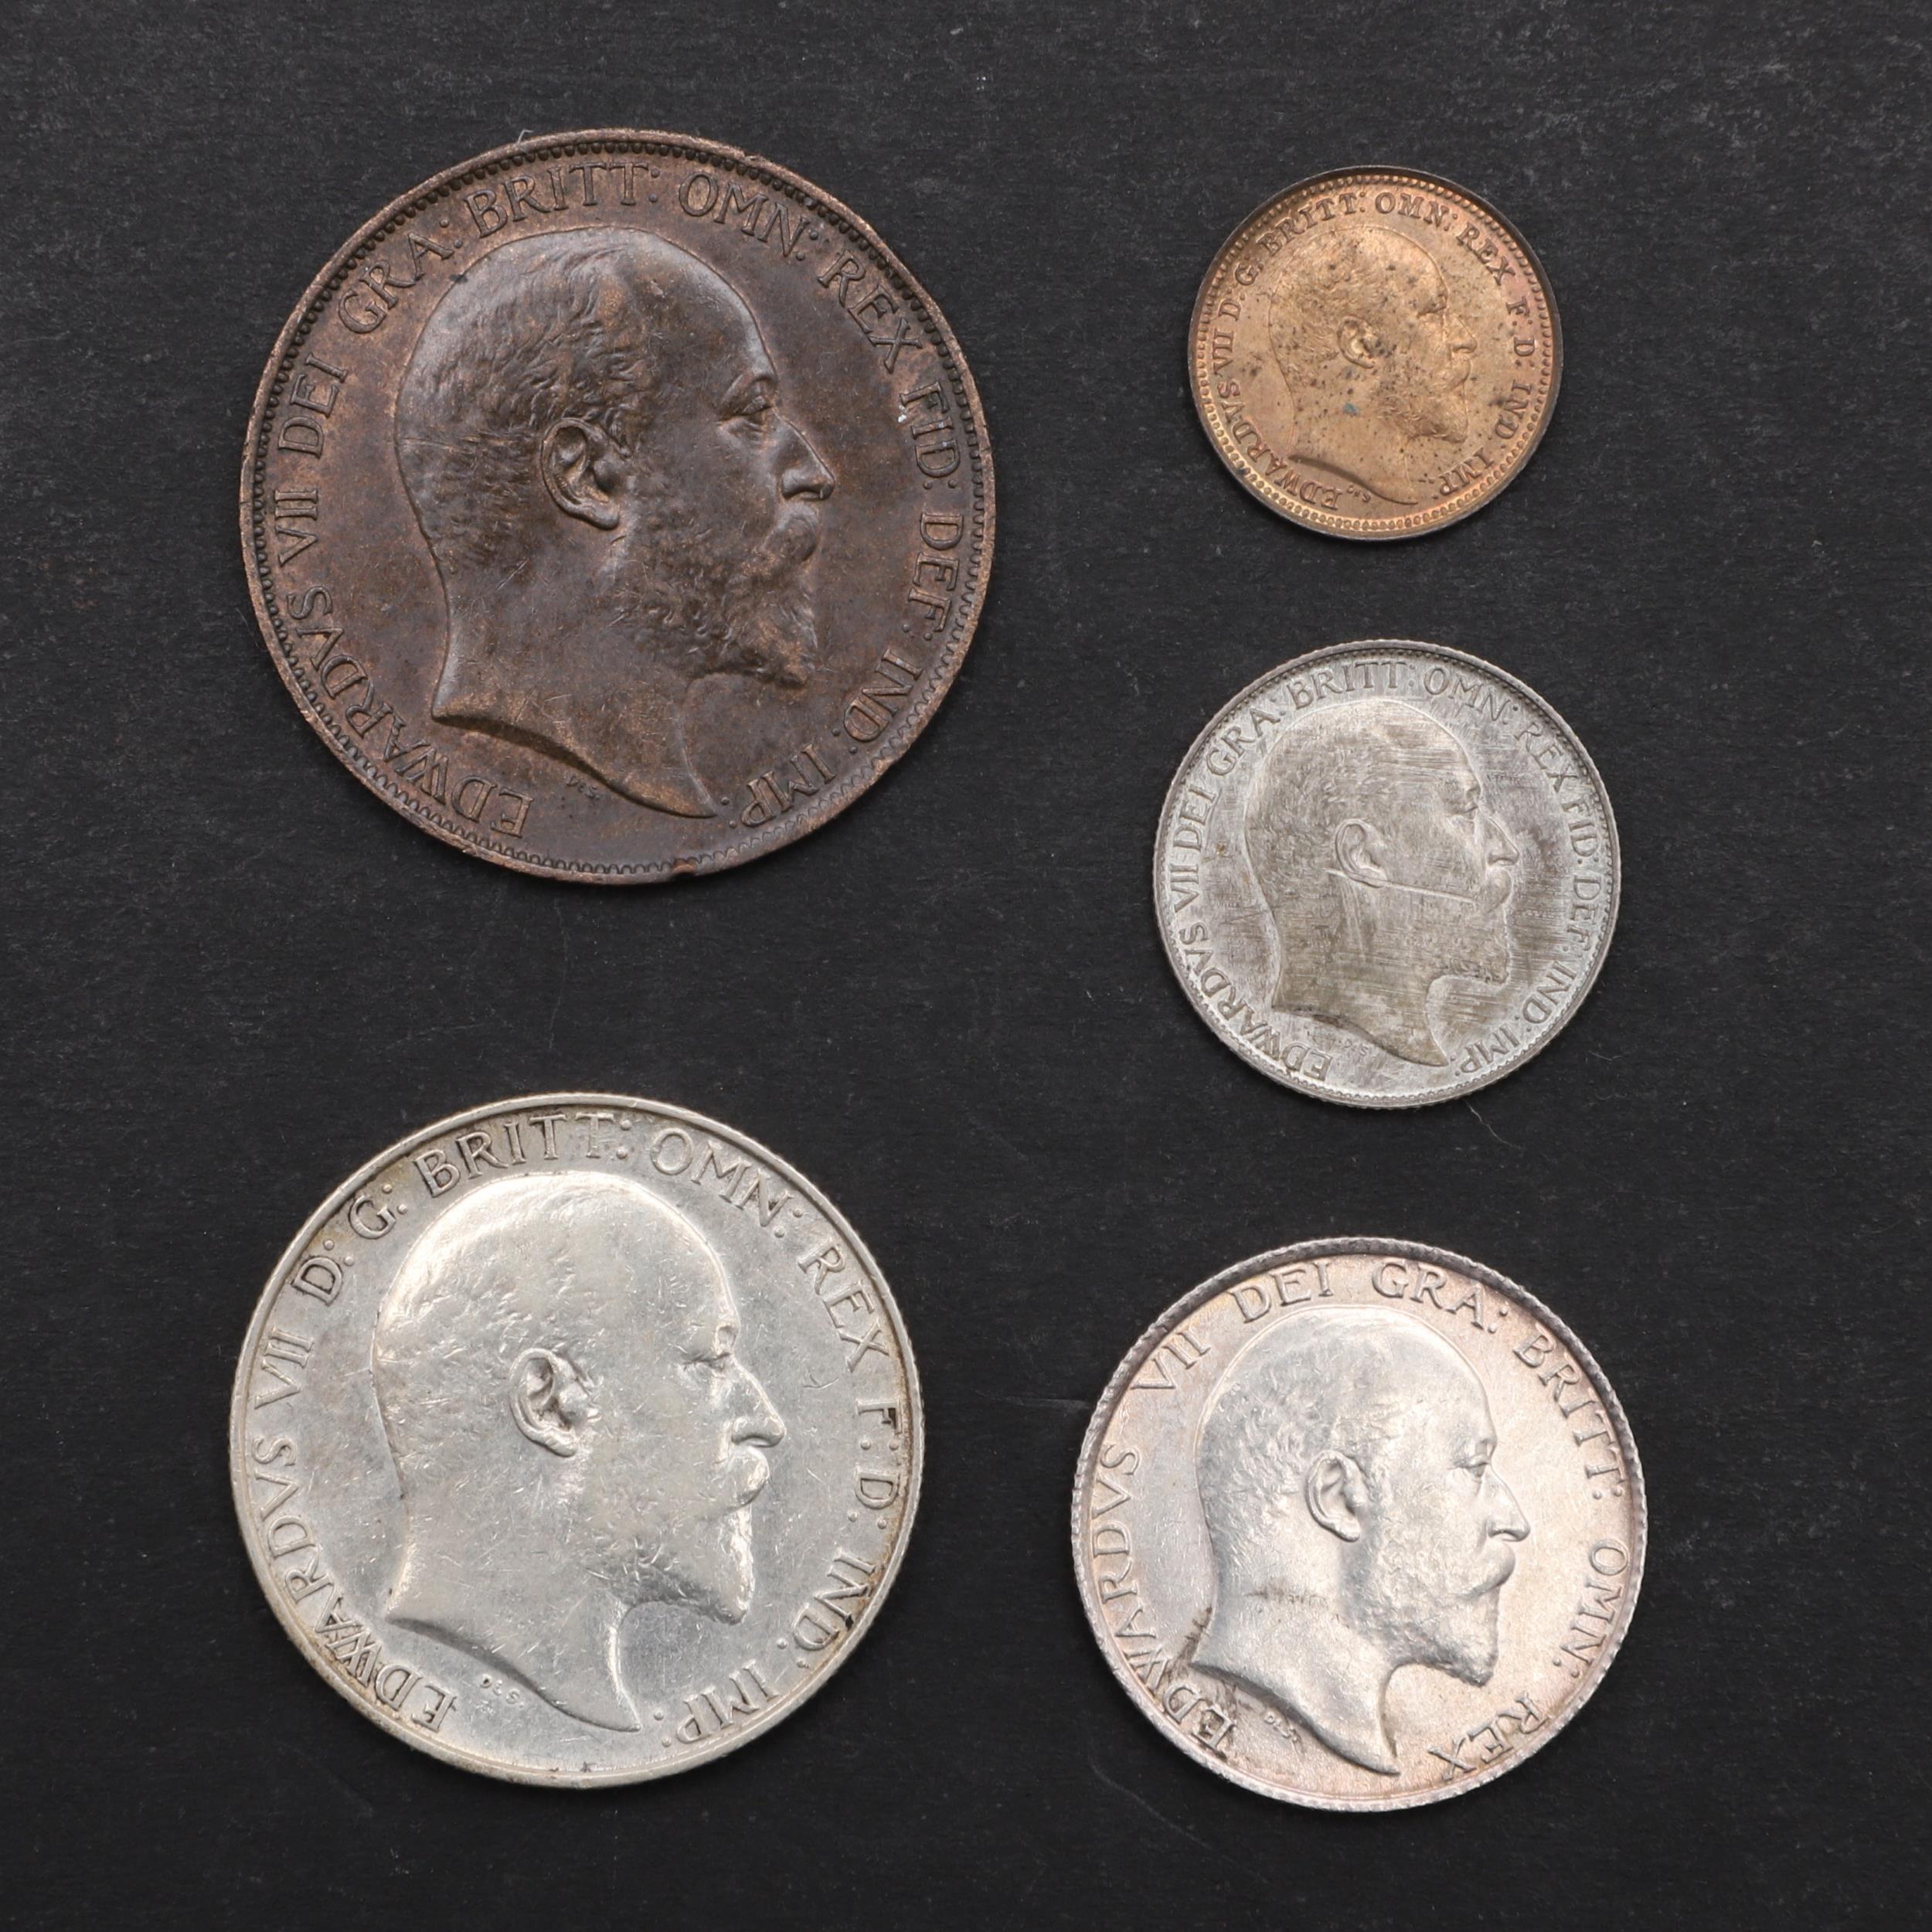 A COLLECTION OF EDWARD VII COINS TO INCLUDE A MATT PROOF SIXPENCE 1902.